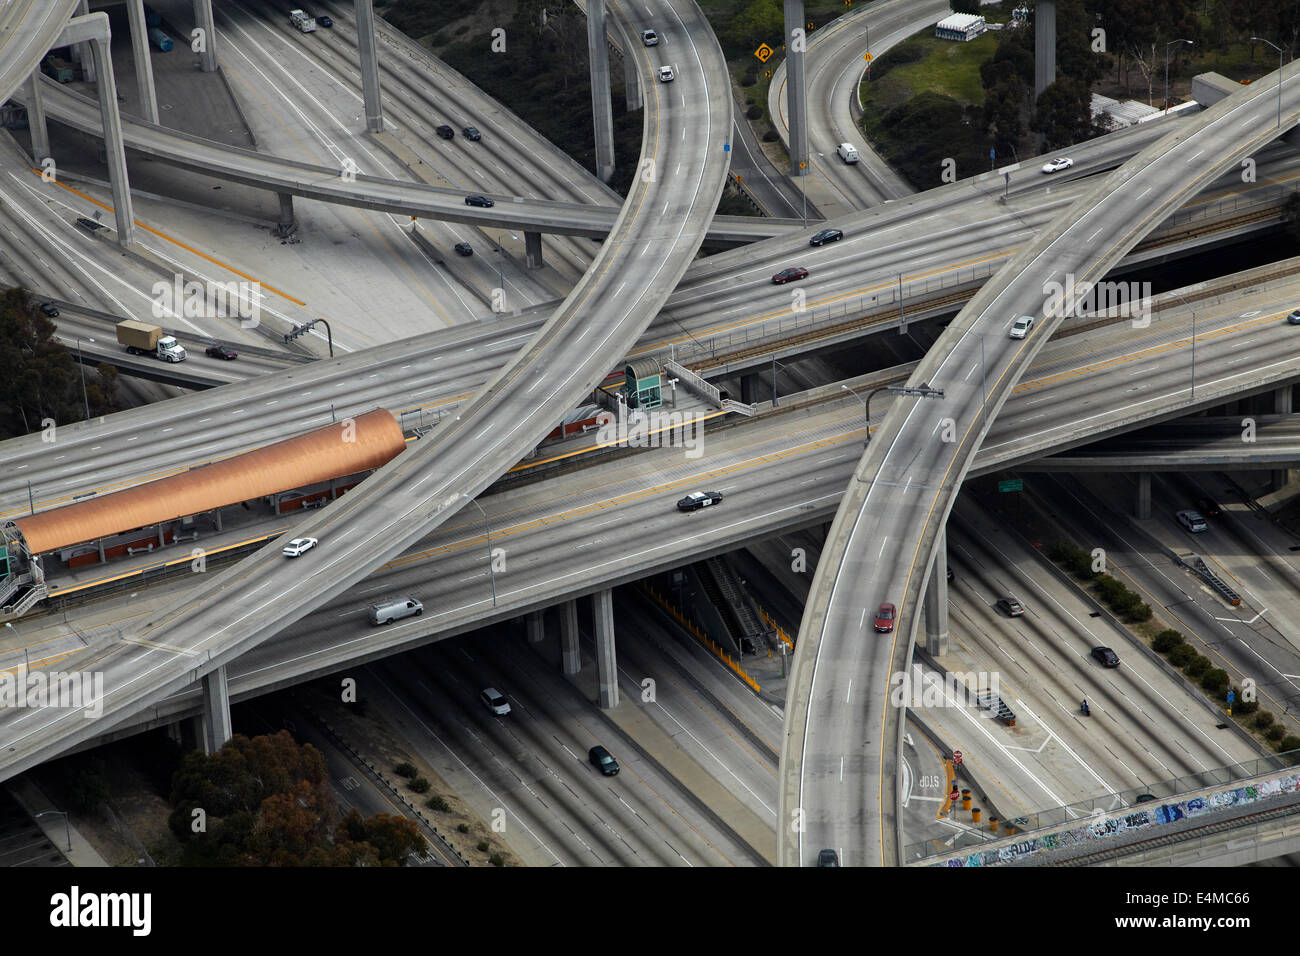 Judge Harry Pregerson Interchange, junction of I-105 and I-110 (Glenn Anderson Freeway and Harbor Freeway), Los Angeles, California, USA Stock Photo